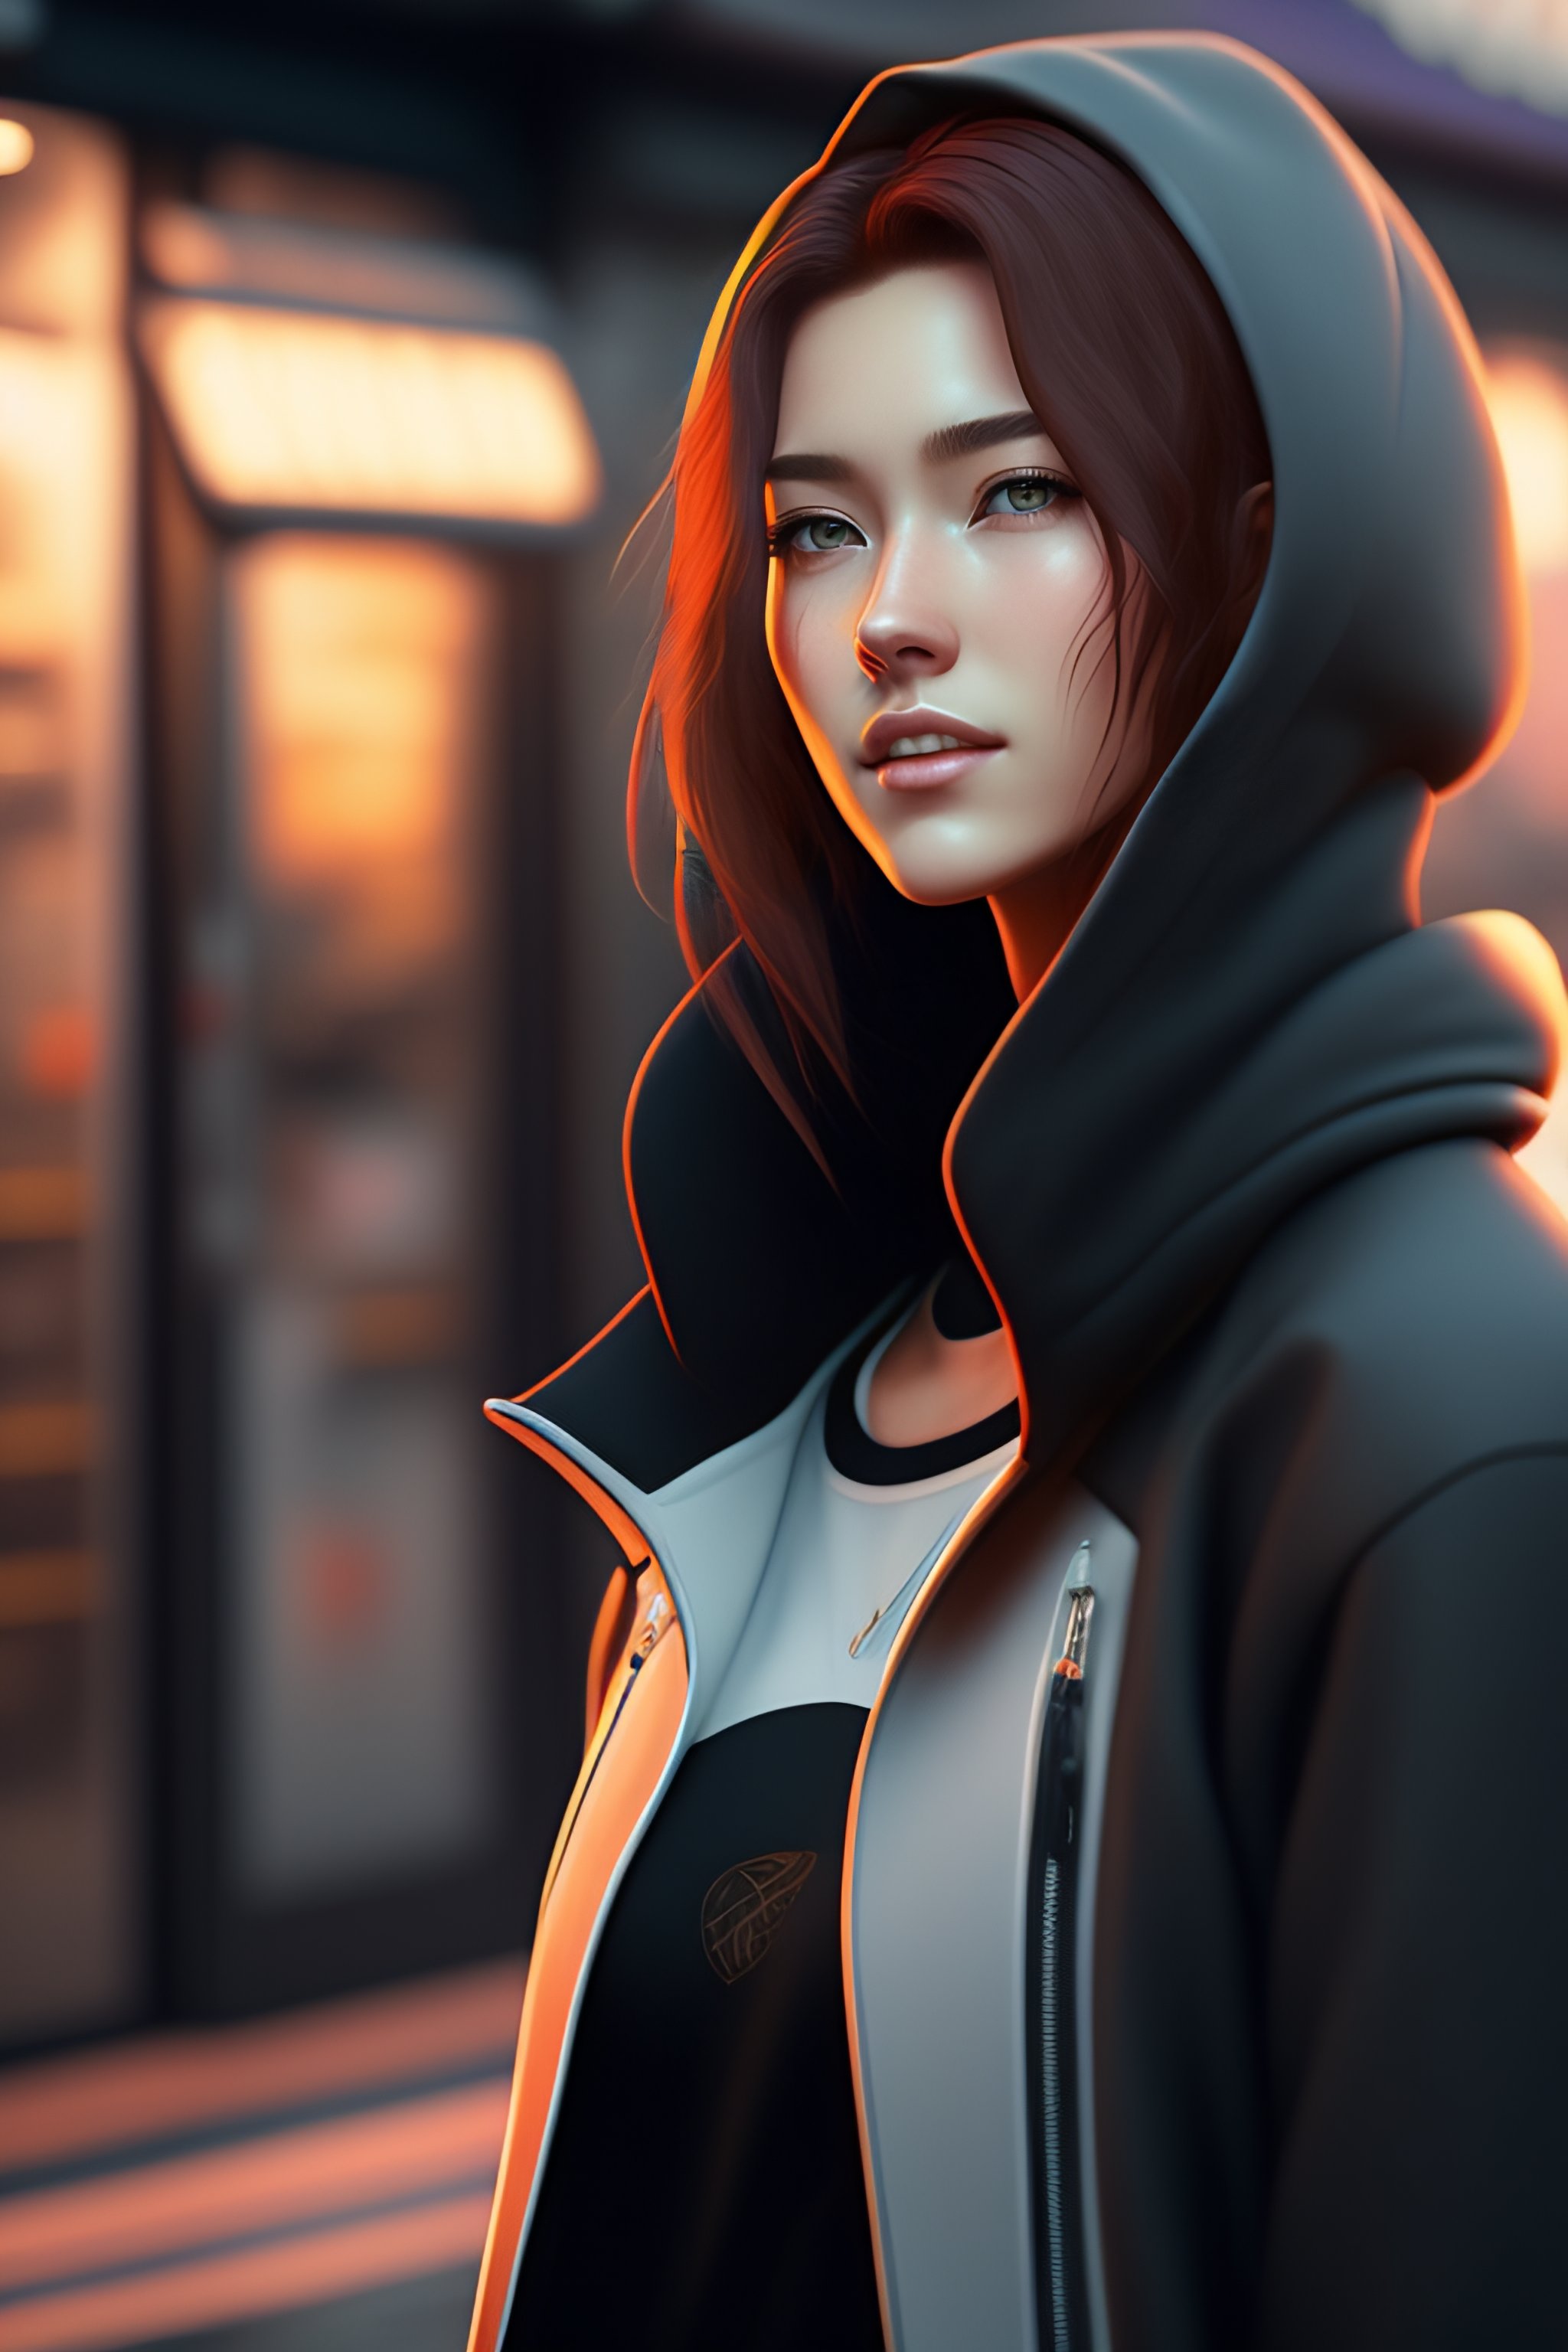 Lexica Cyberpunk City Setting Realistic Young Anime White Woman Wearing A Hoodie Under A 1259